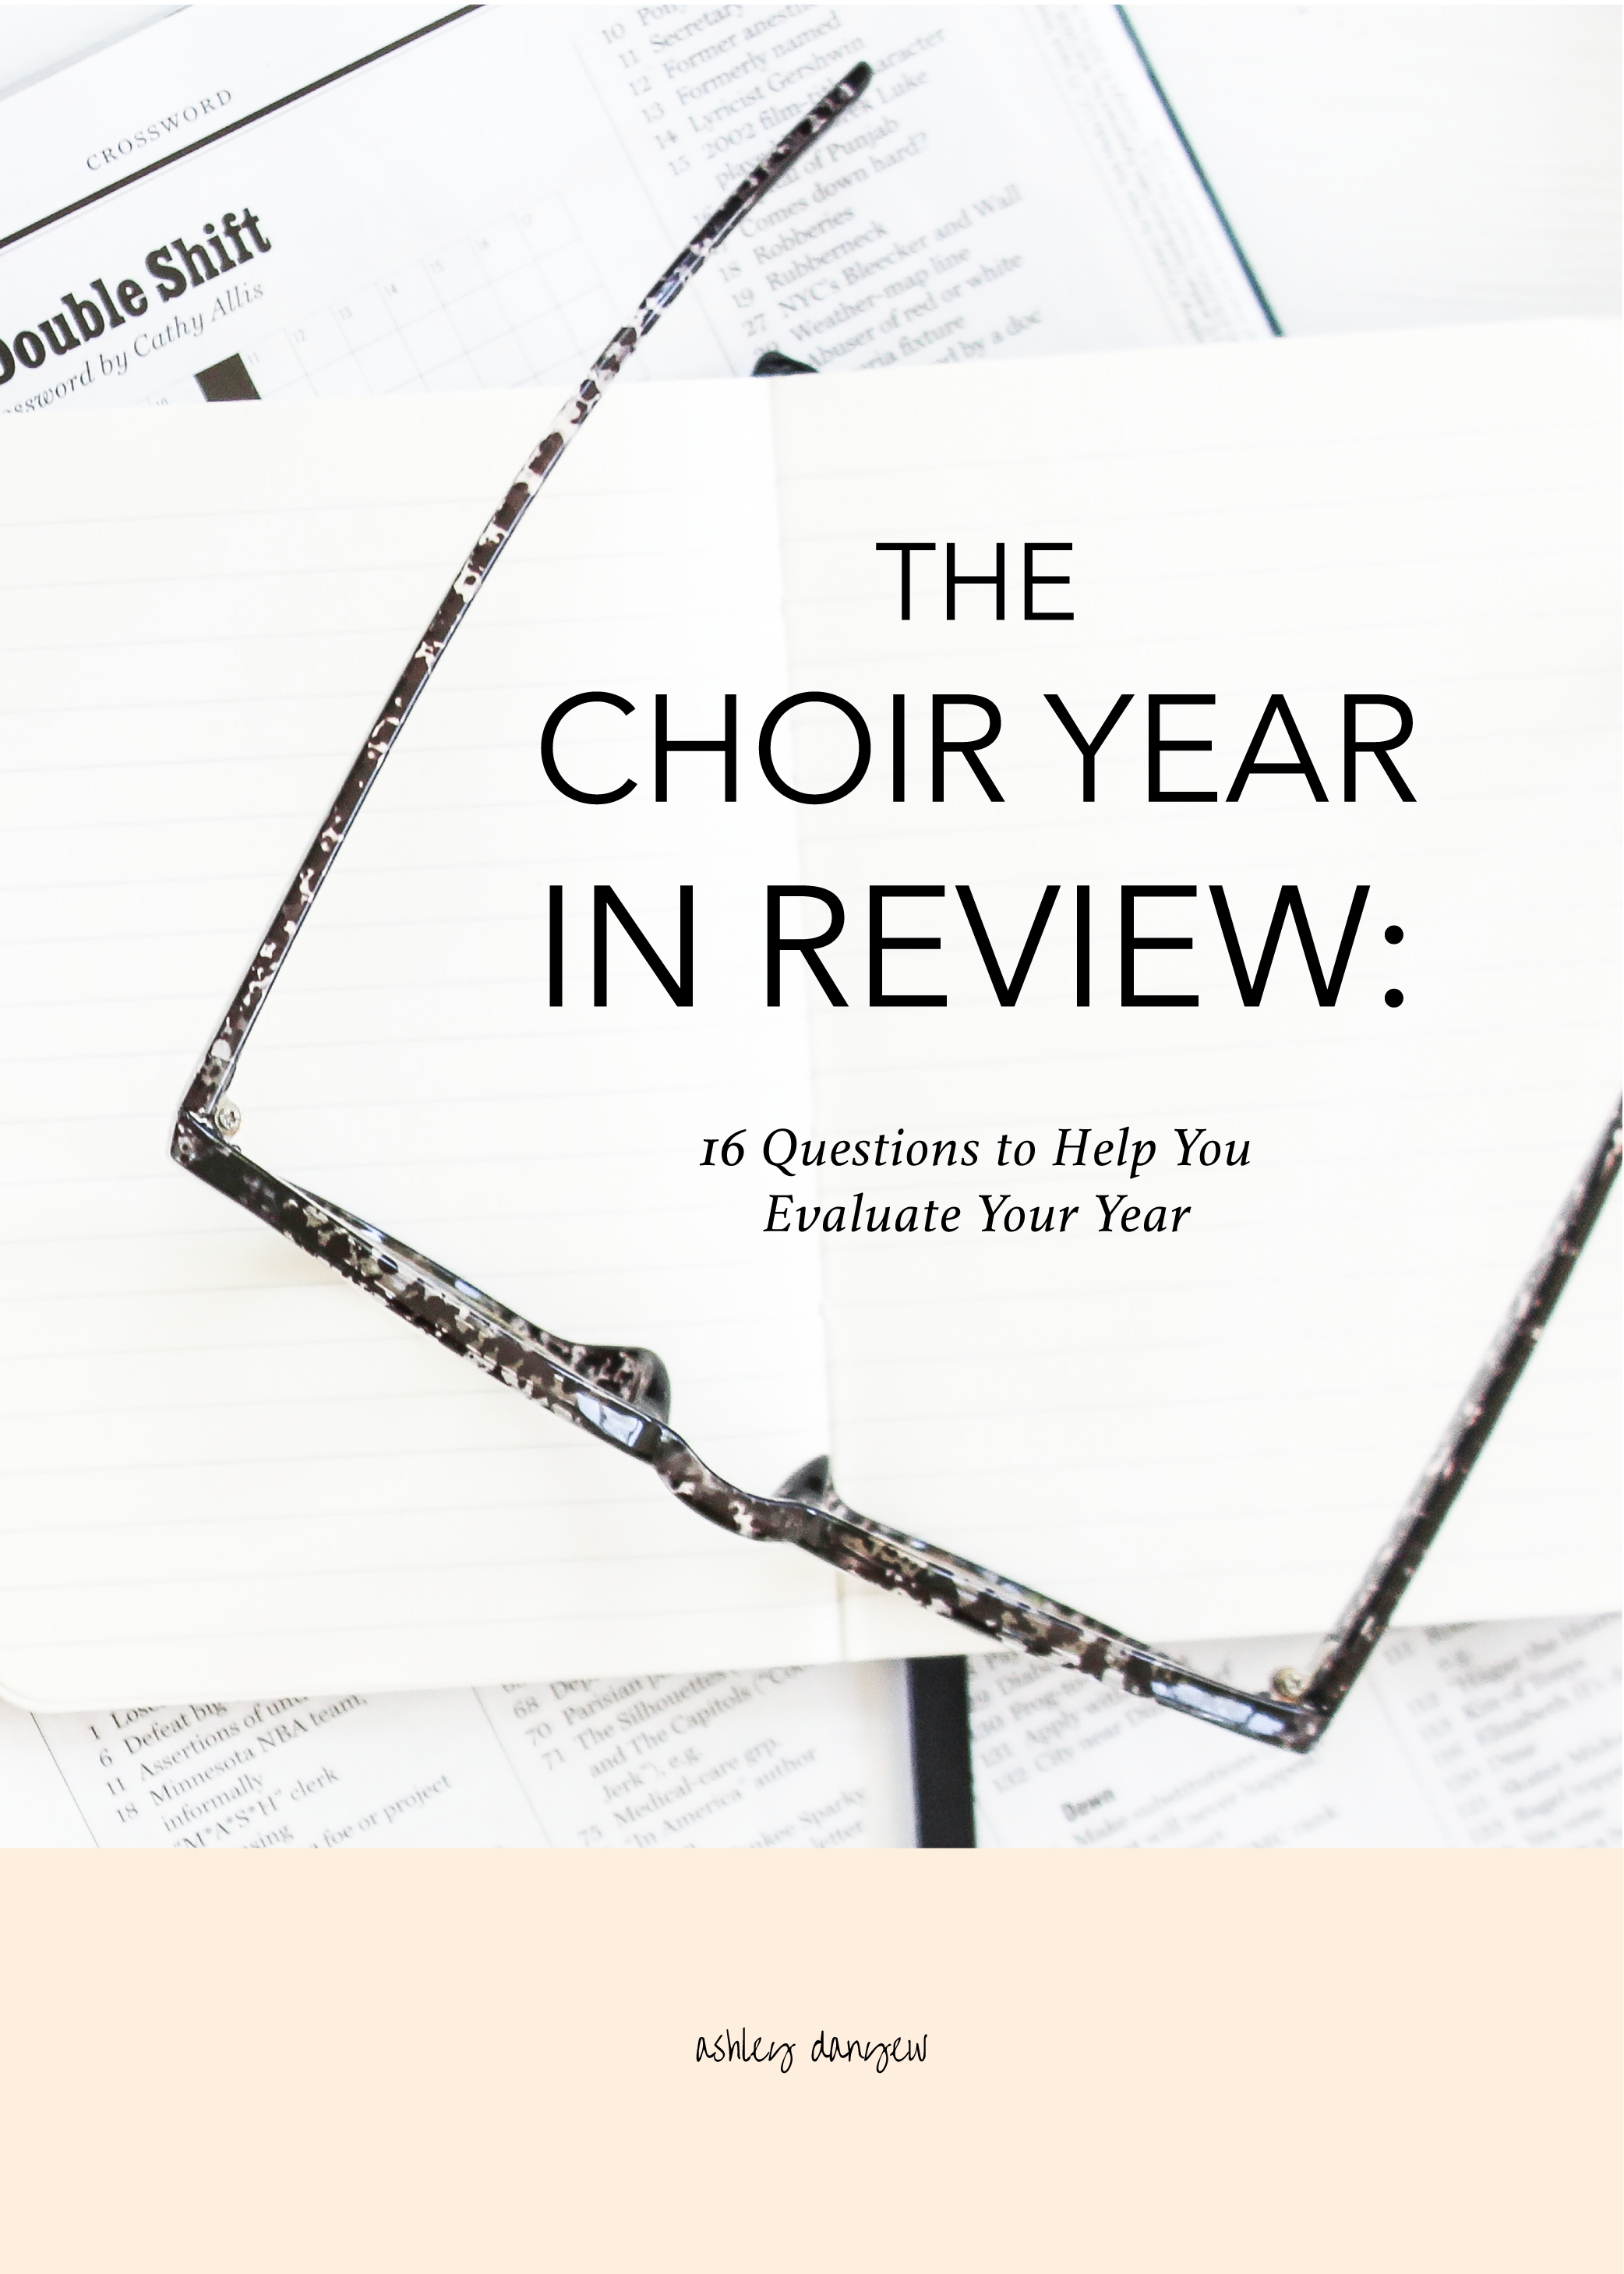 Copy of The Choir Year in Review: 16 Questions to Help You Evaluate Your Year